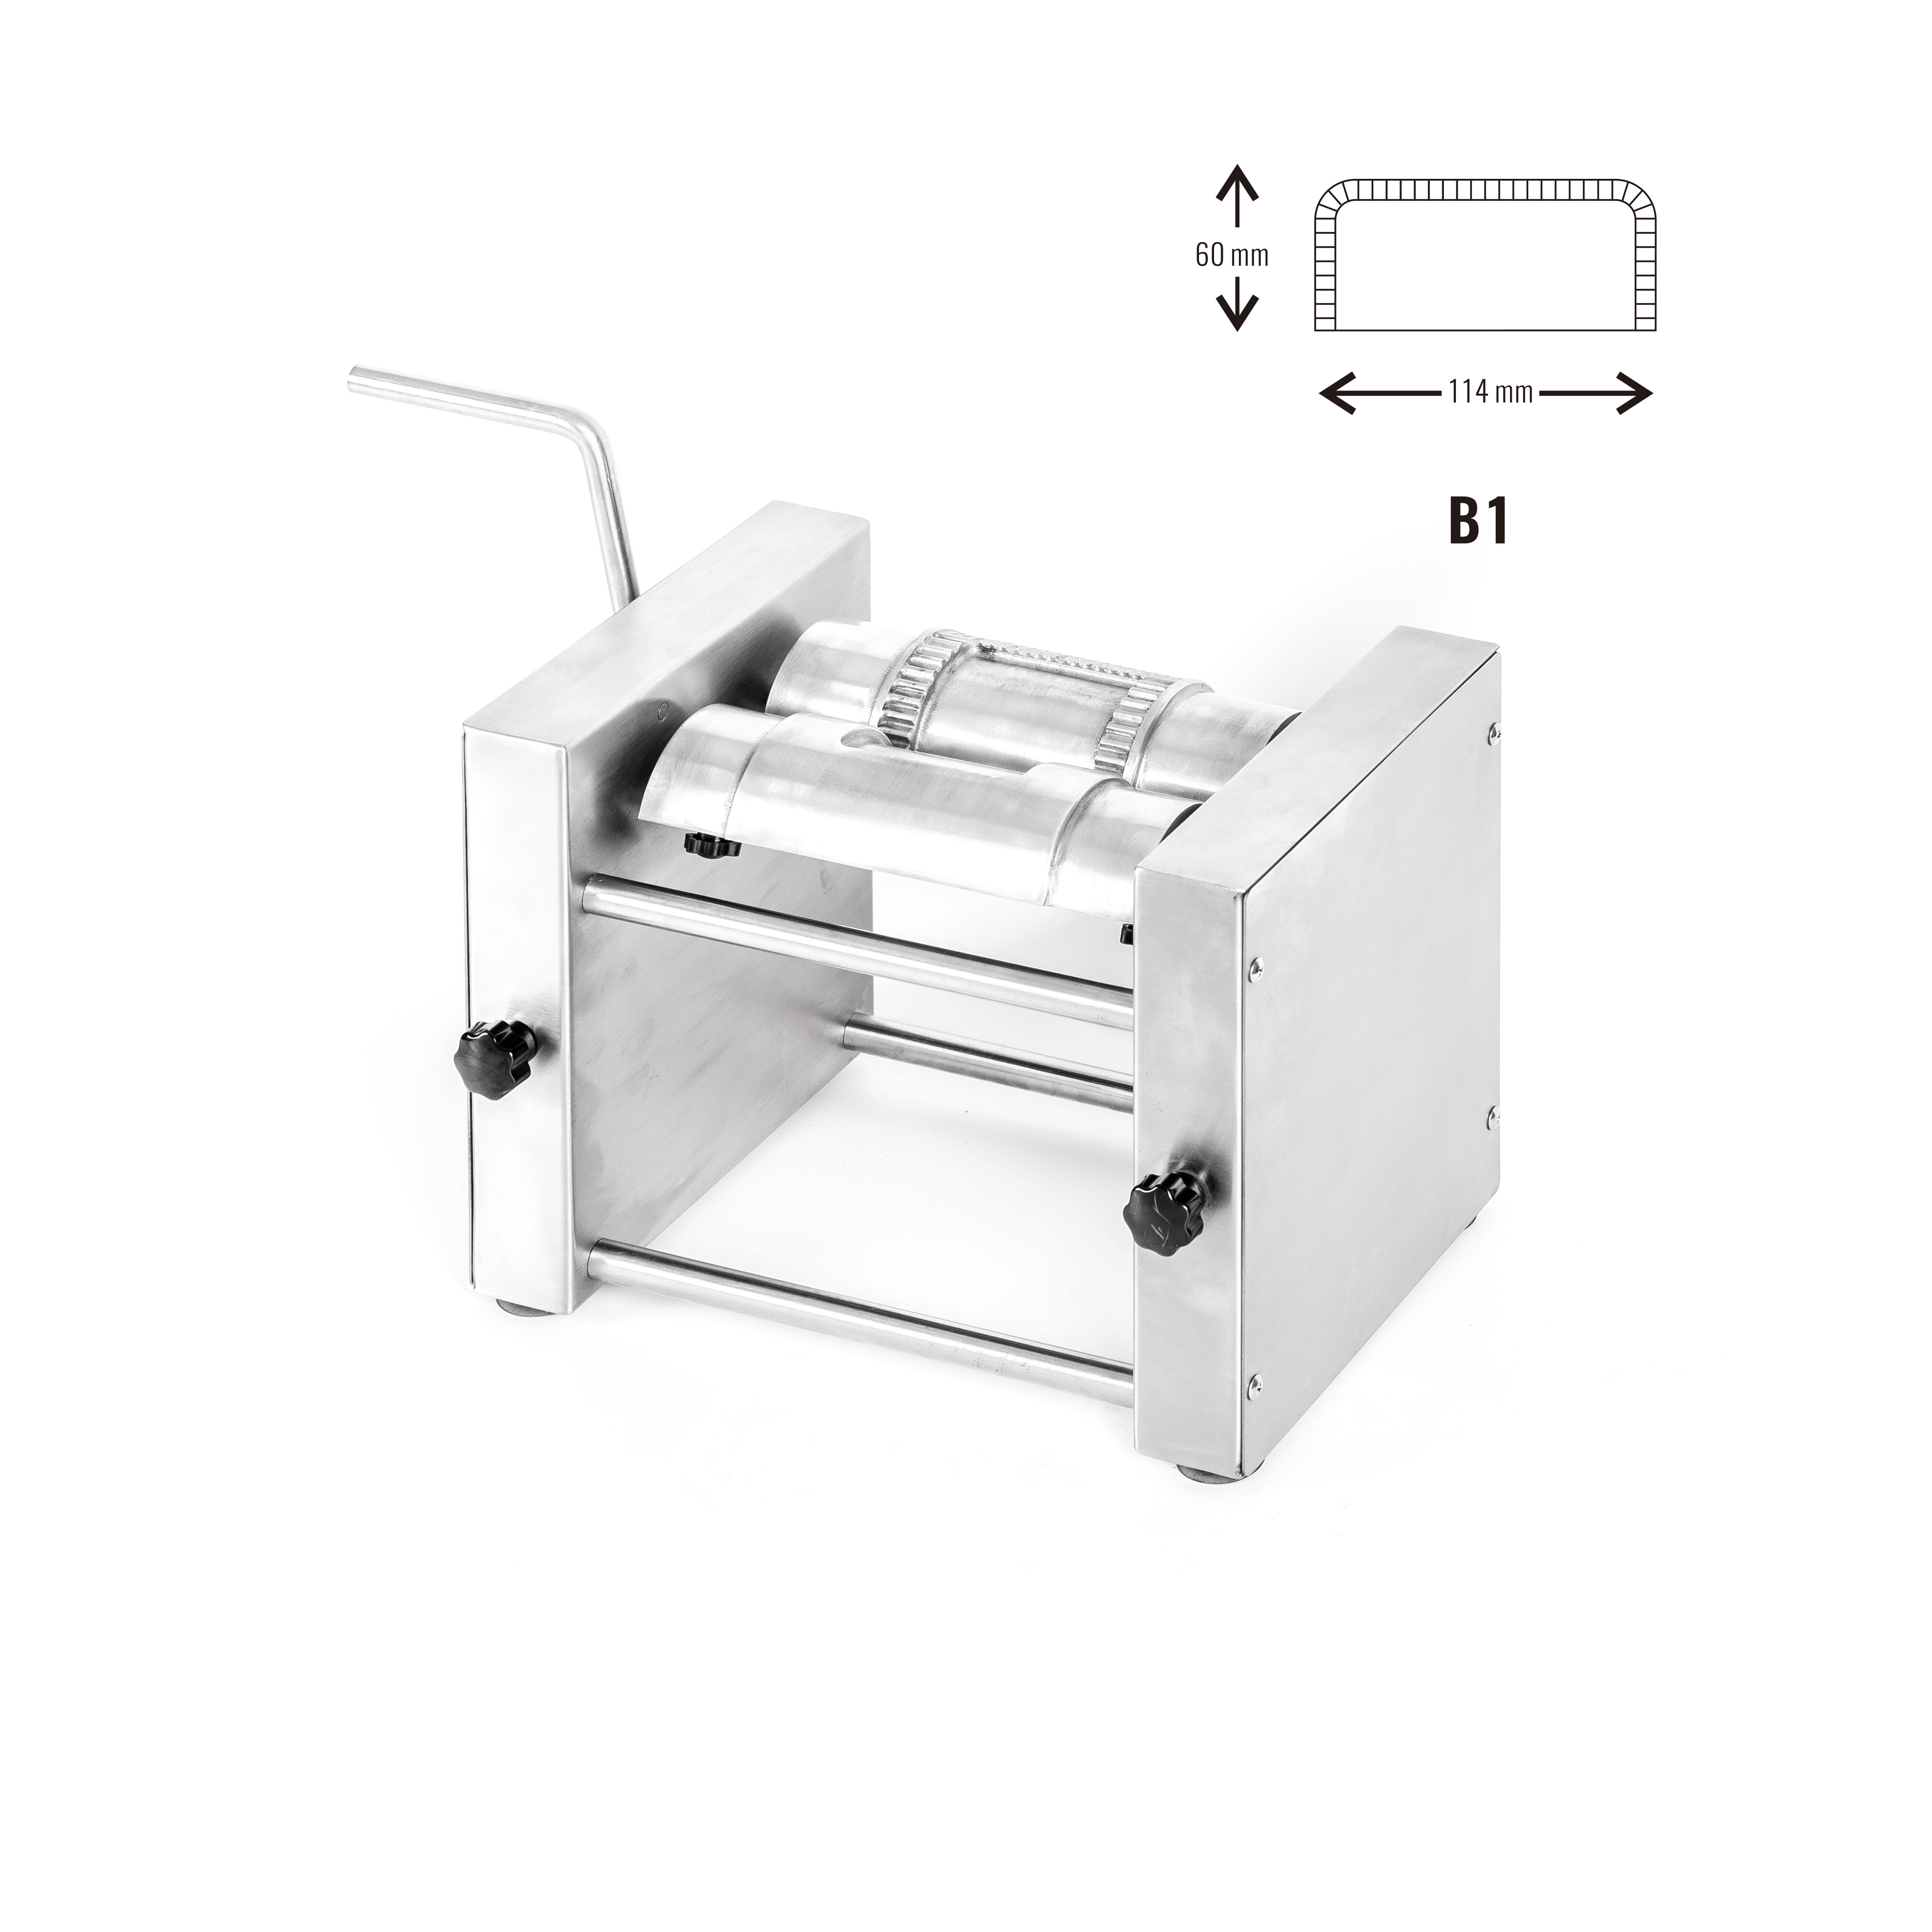 Shape Stainless Steel Homemade Meat Press Machine Deli Meat With